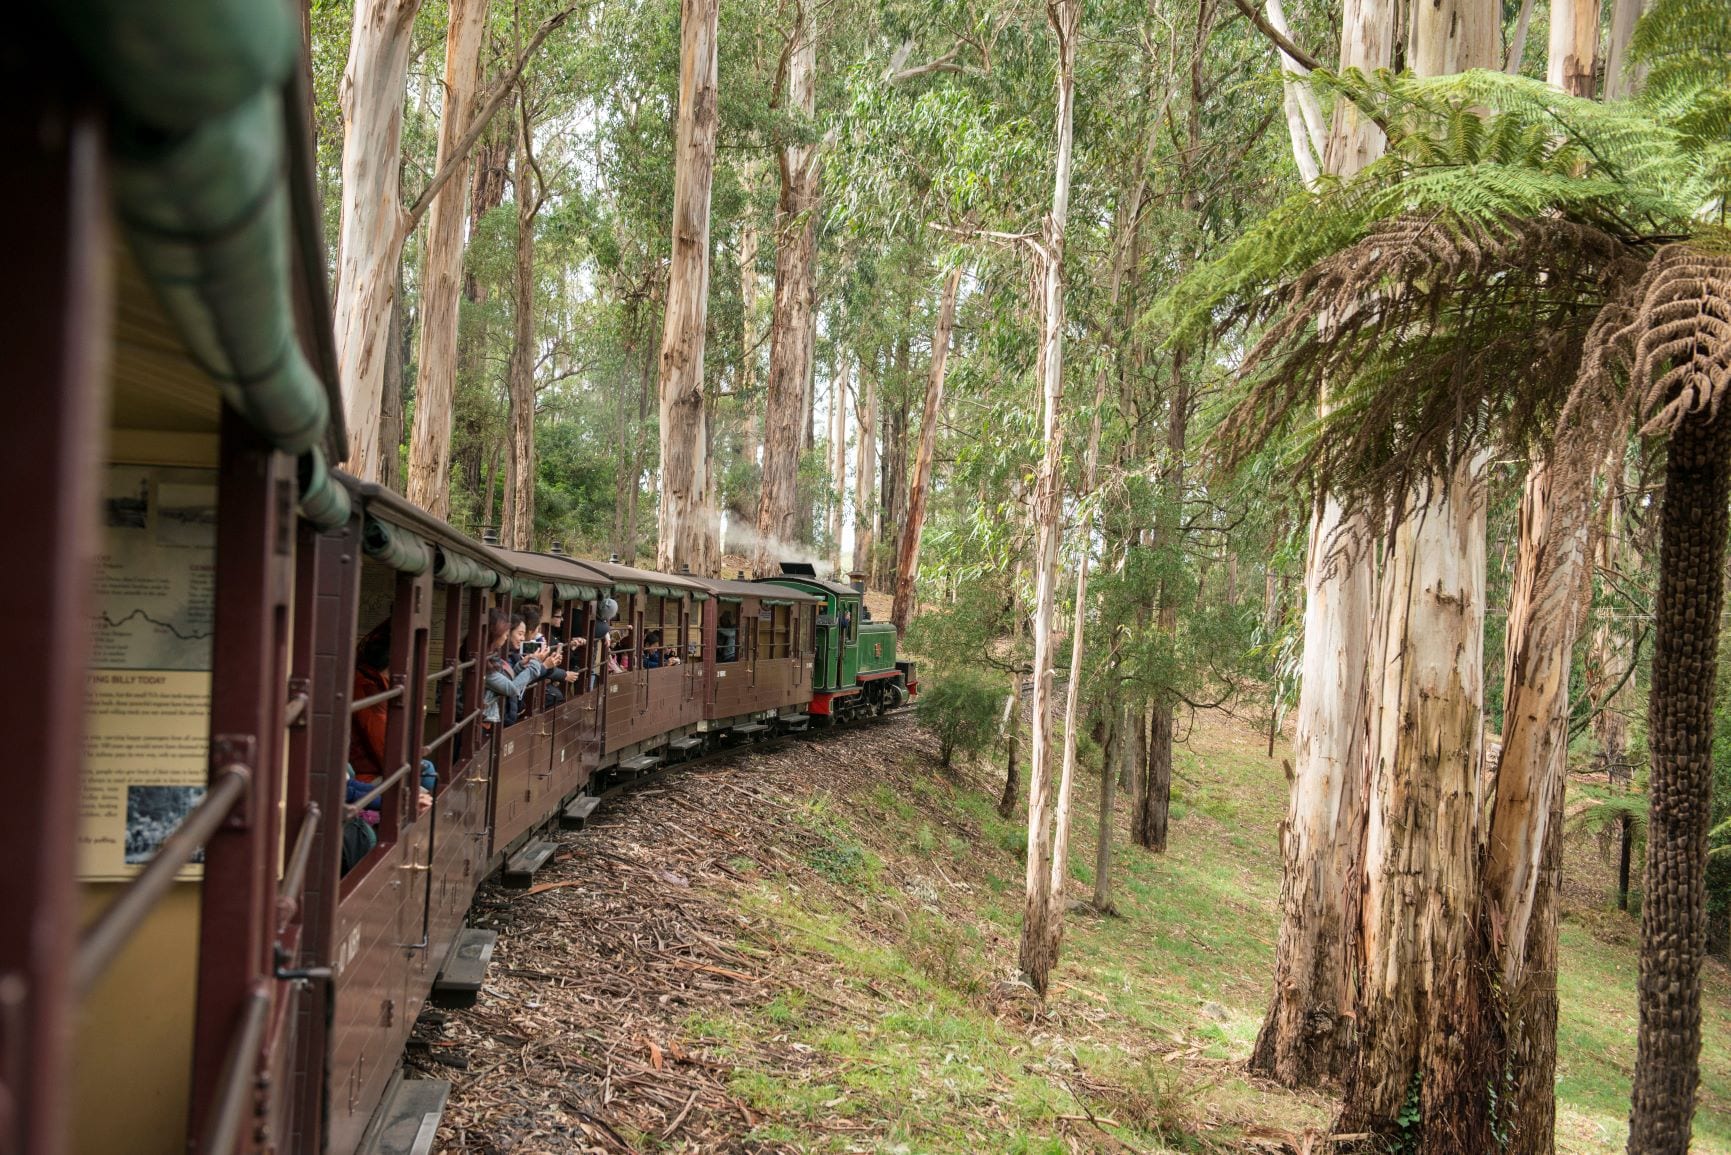 Things to do in the Dandenong Ranges with kids